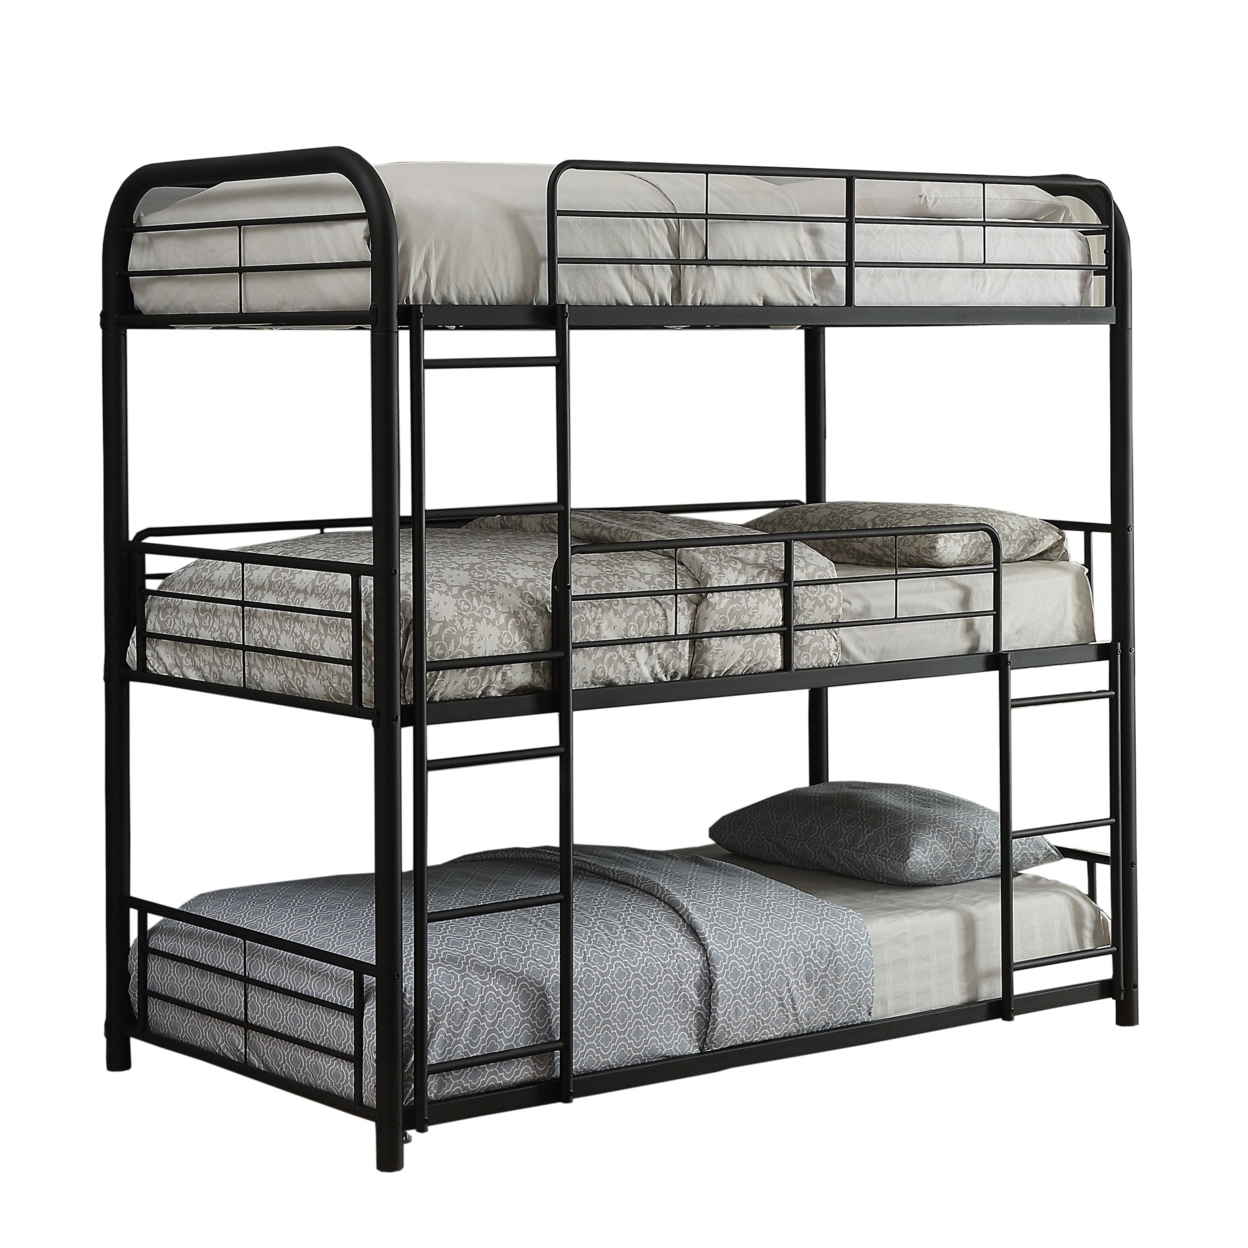 Triple Layer Full Size Metal Bunk Bed With Attached Ladder, Black- Saltoro Sherpi